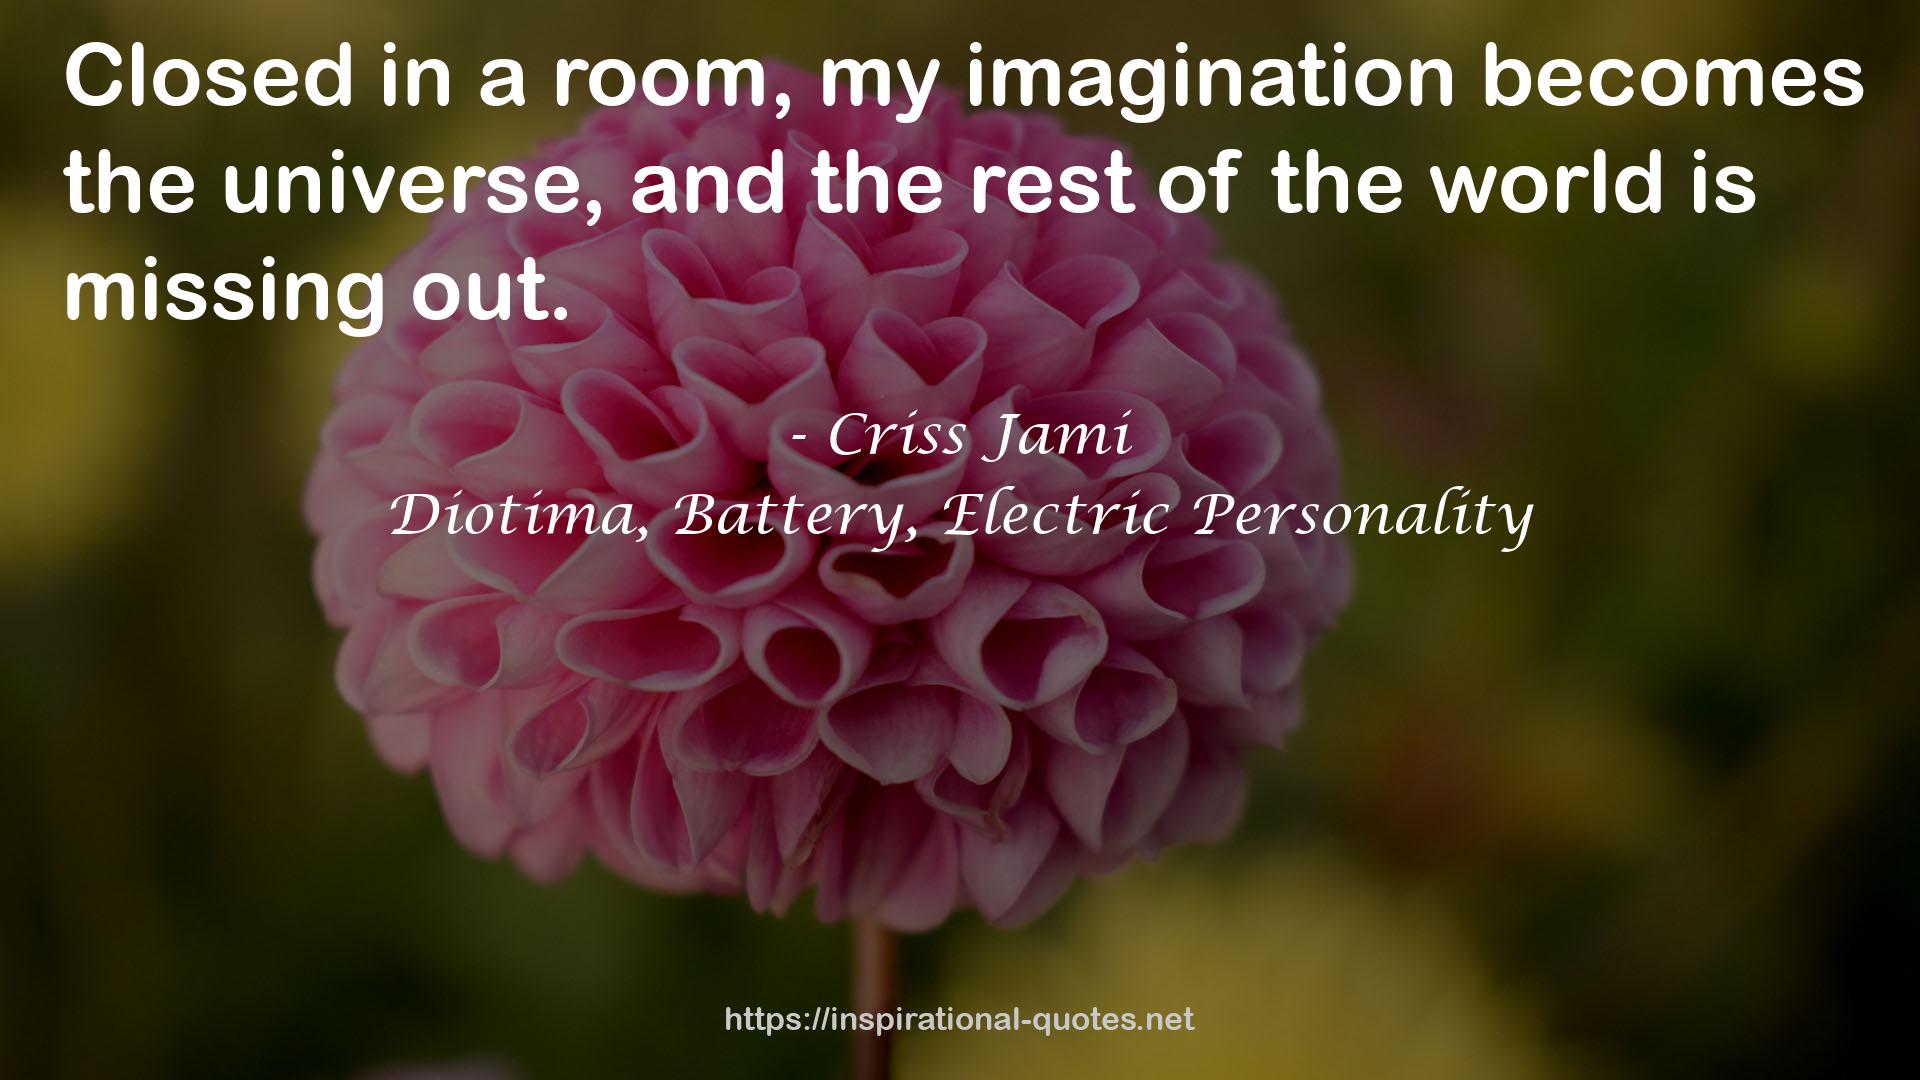 Diotima, Battery, Electric Personality QUOTES